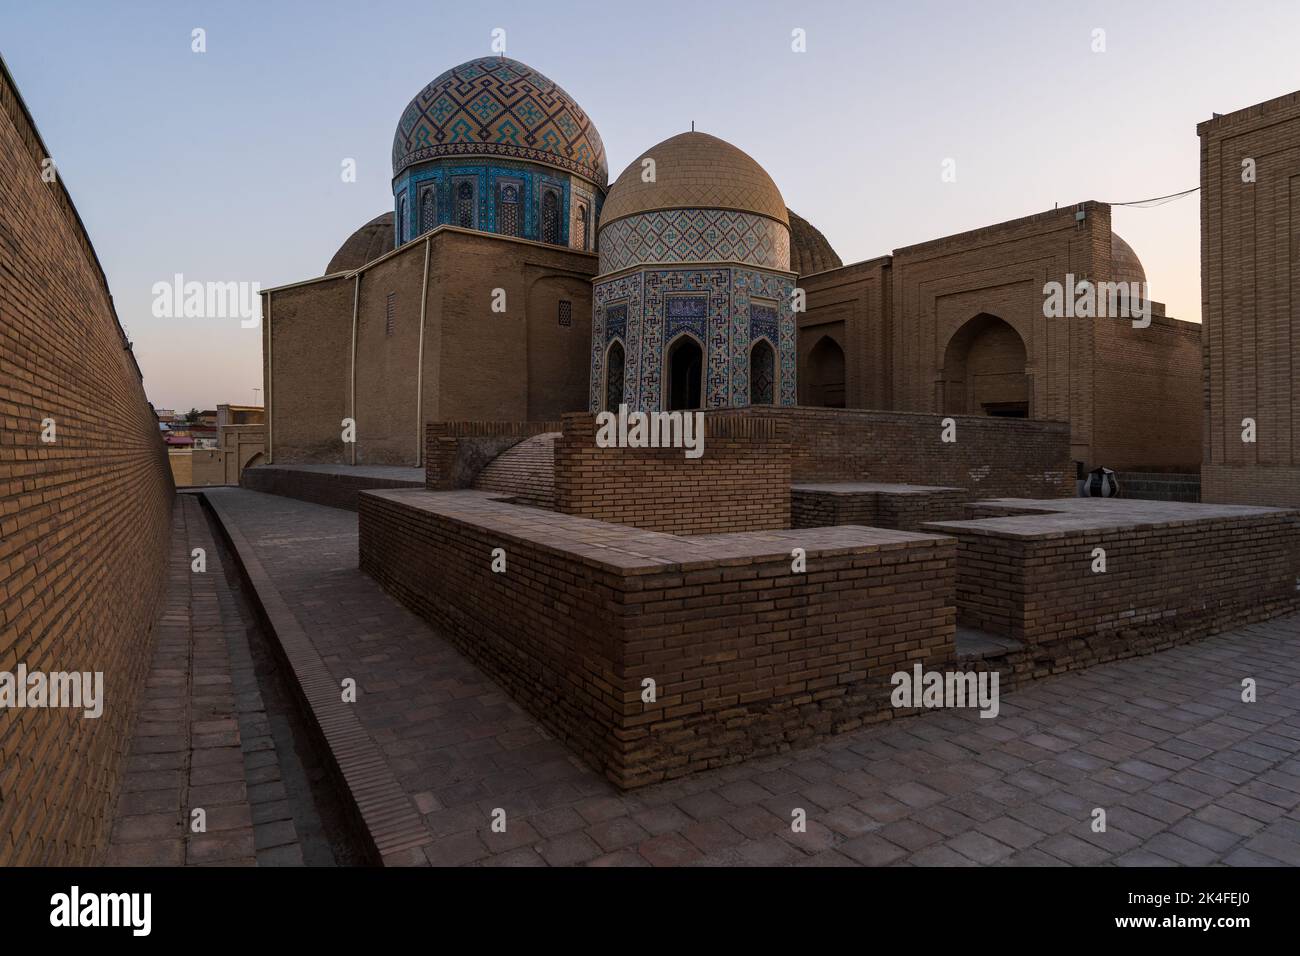 The blue tiled facades domes and arches of the Shah-i-Zinda mausoleum complex at sunset, Samarkand with very few or no people. Stock Photo